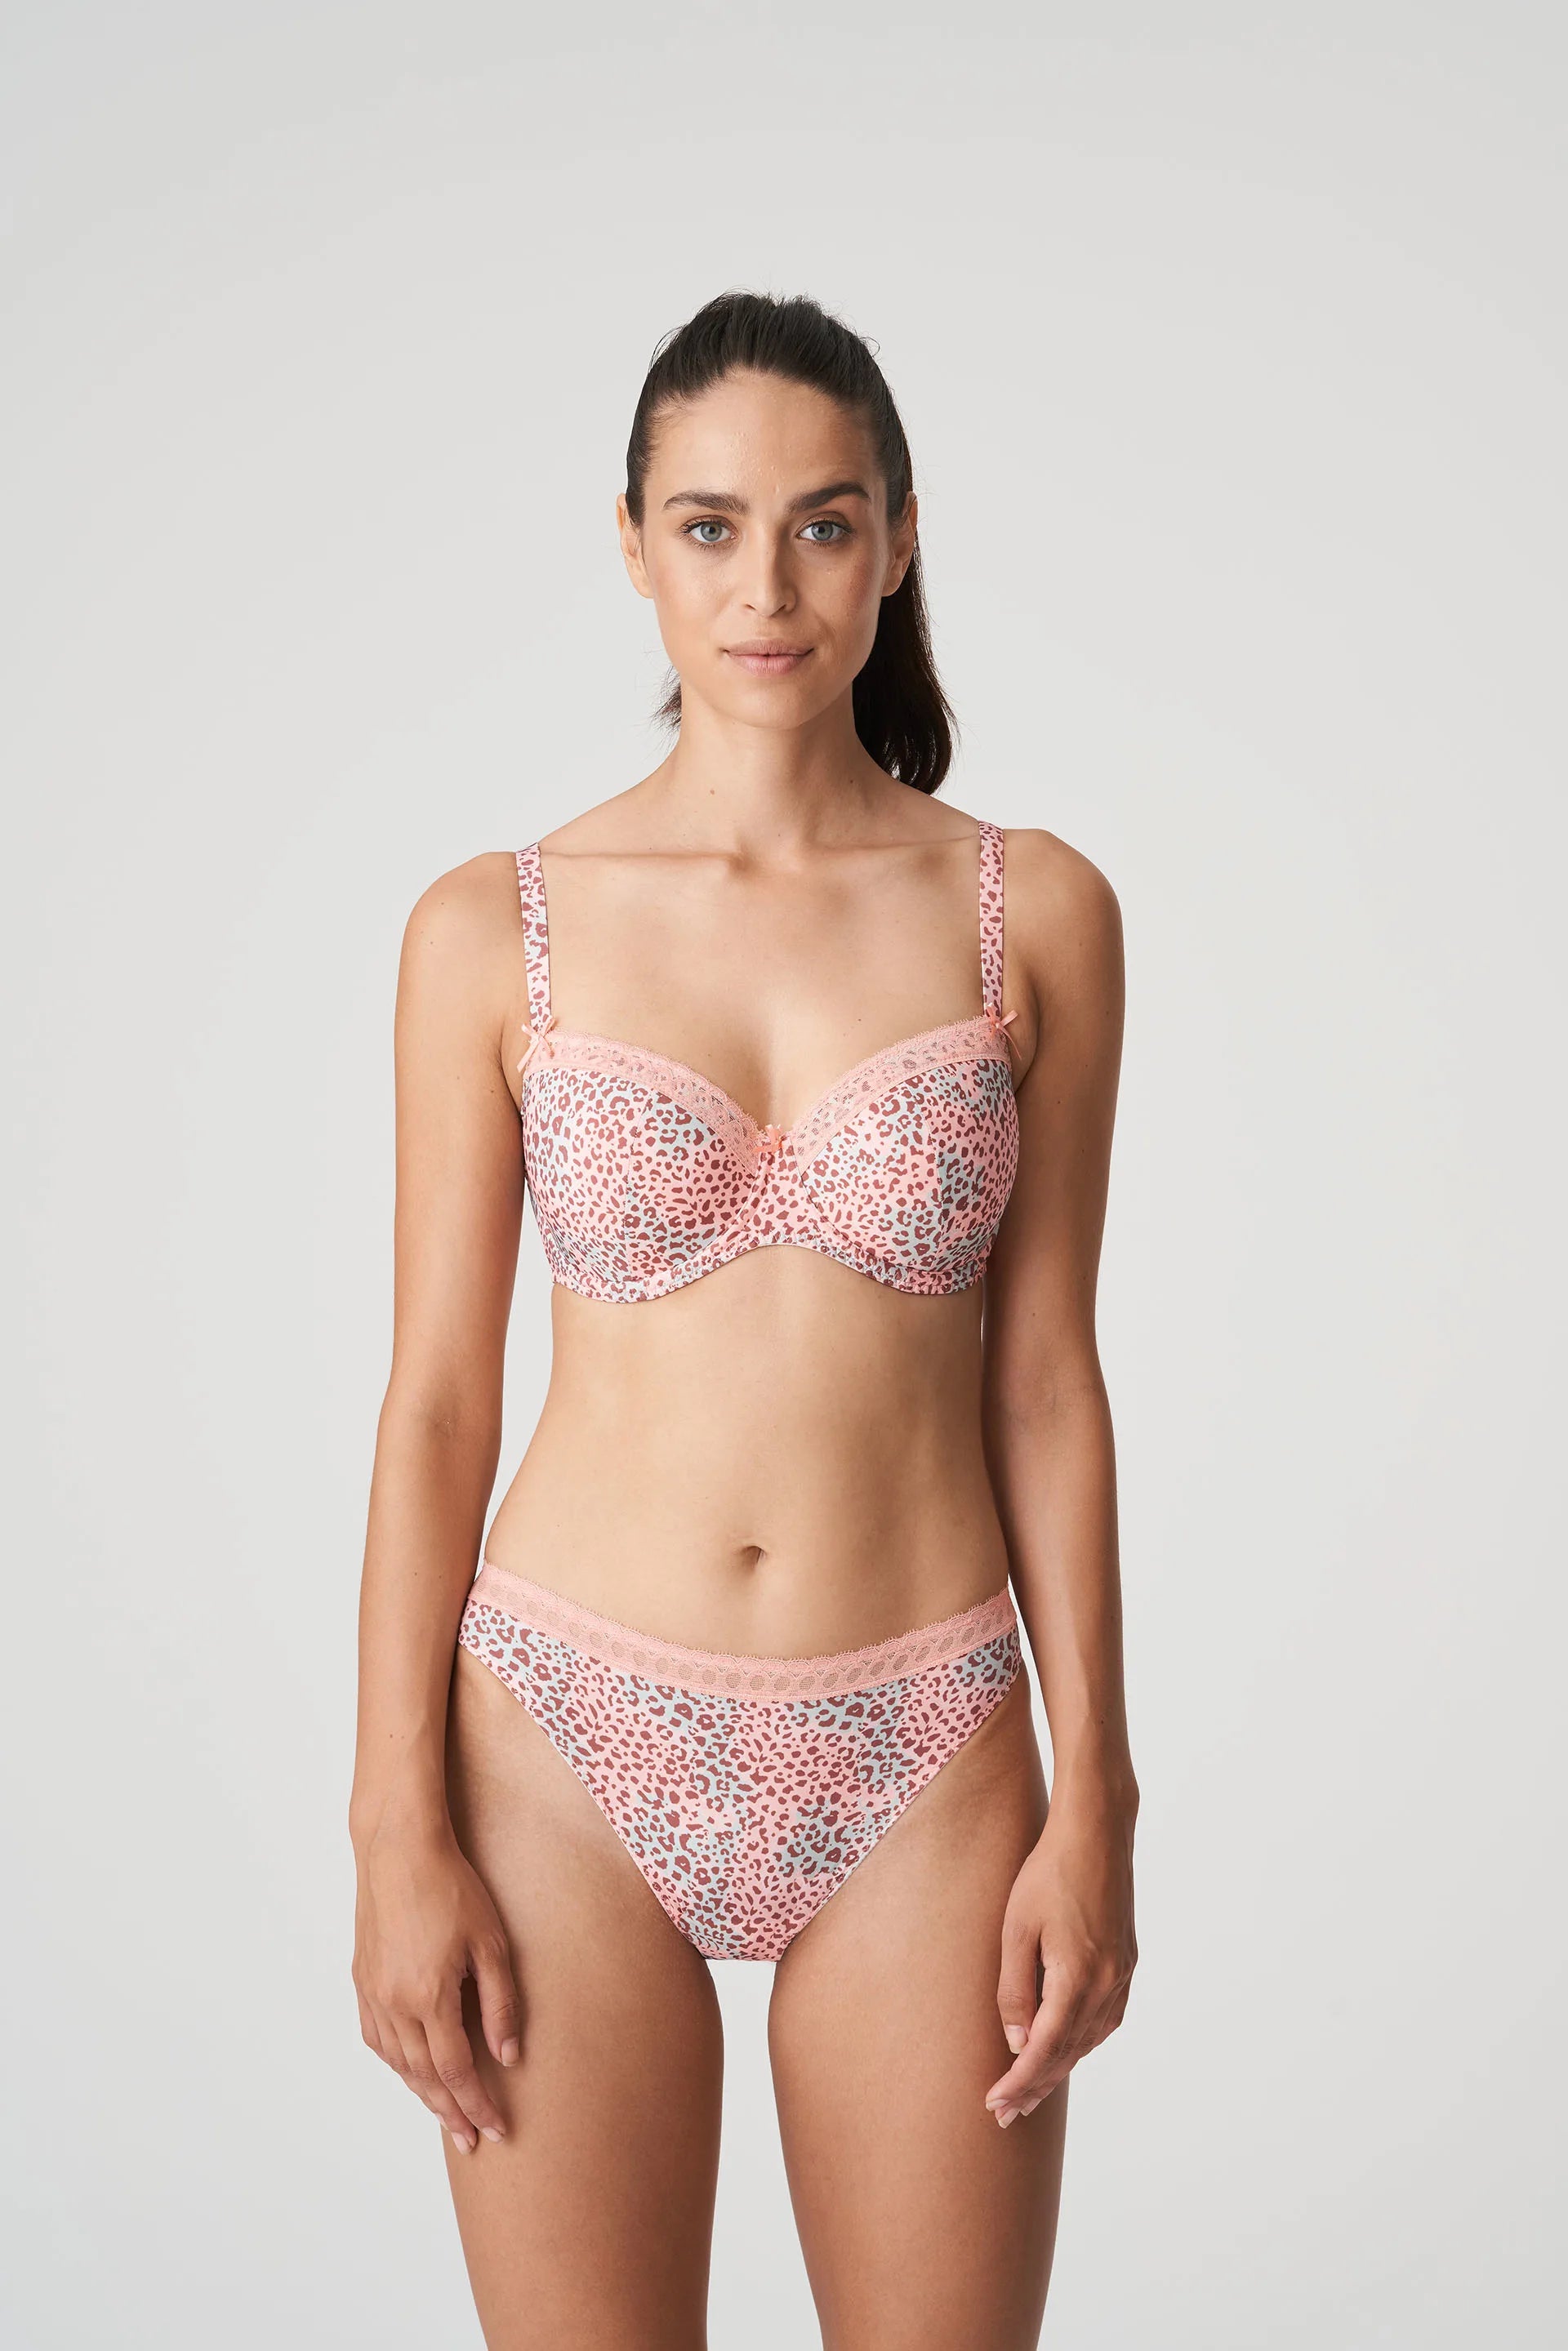 Livadi Rio Brief - Summer Rose, worn by model, front view